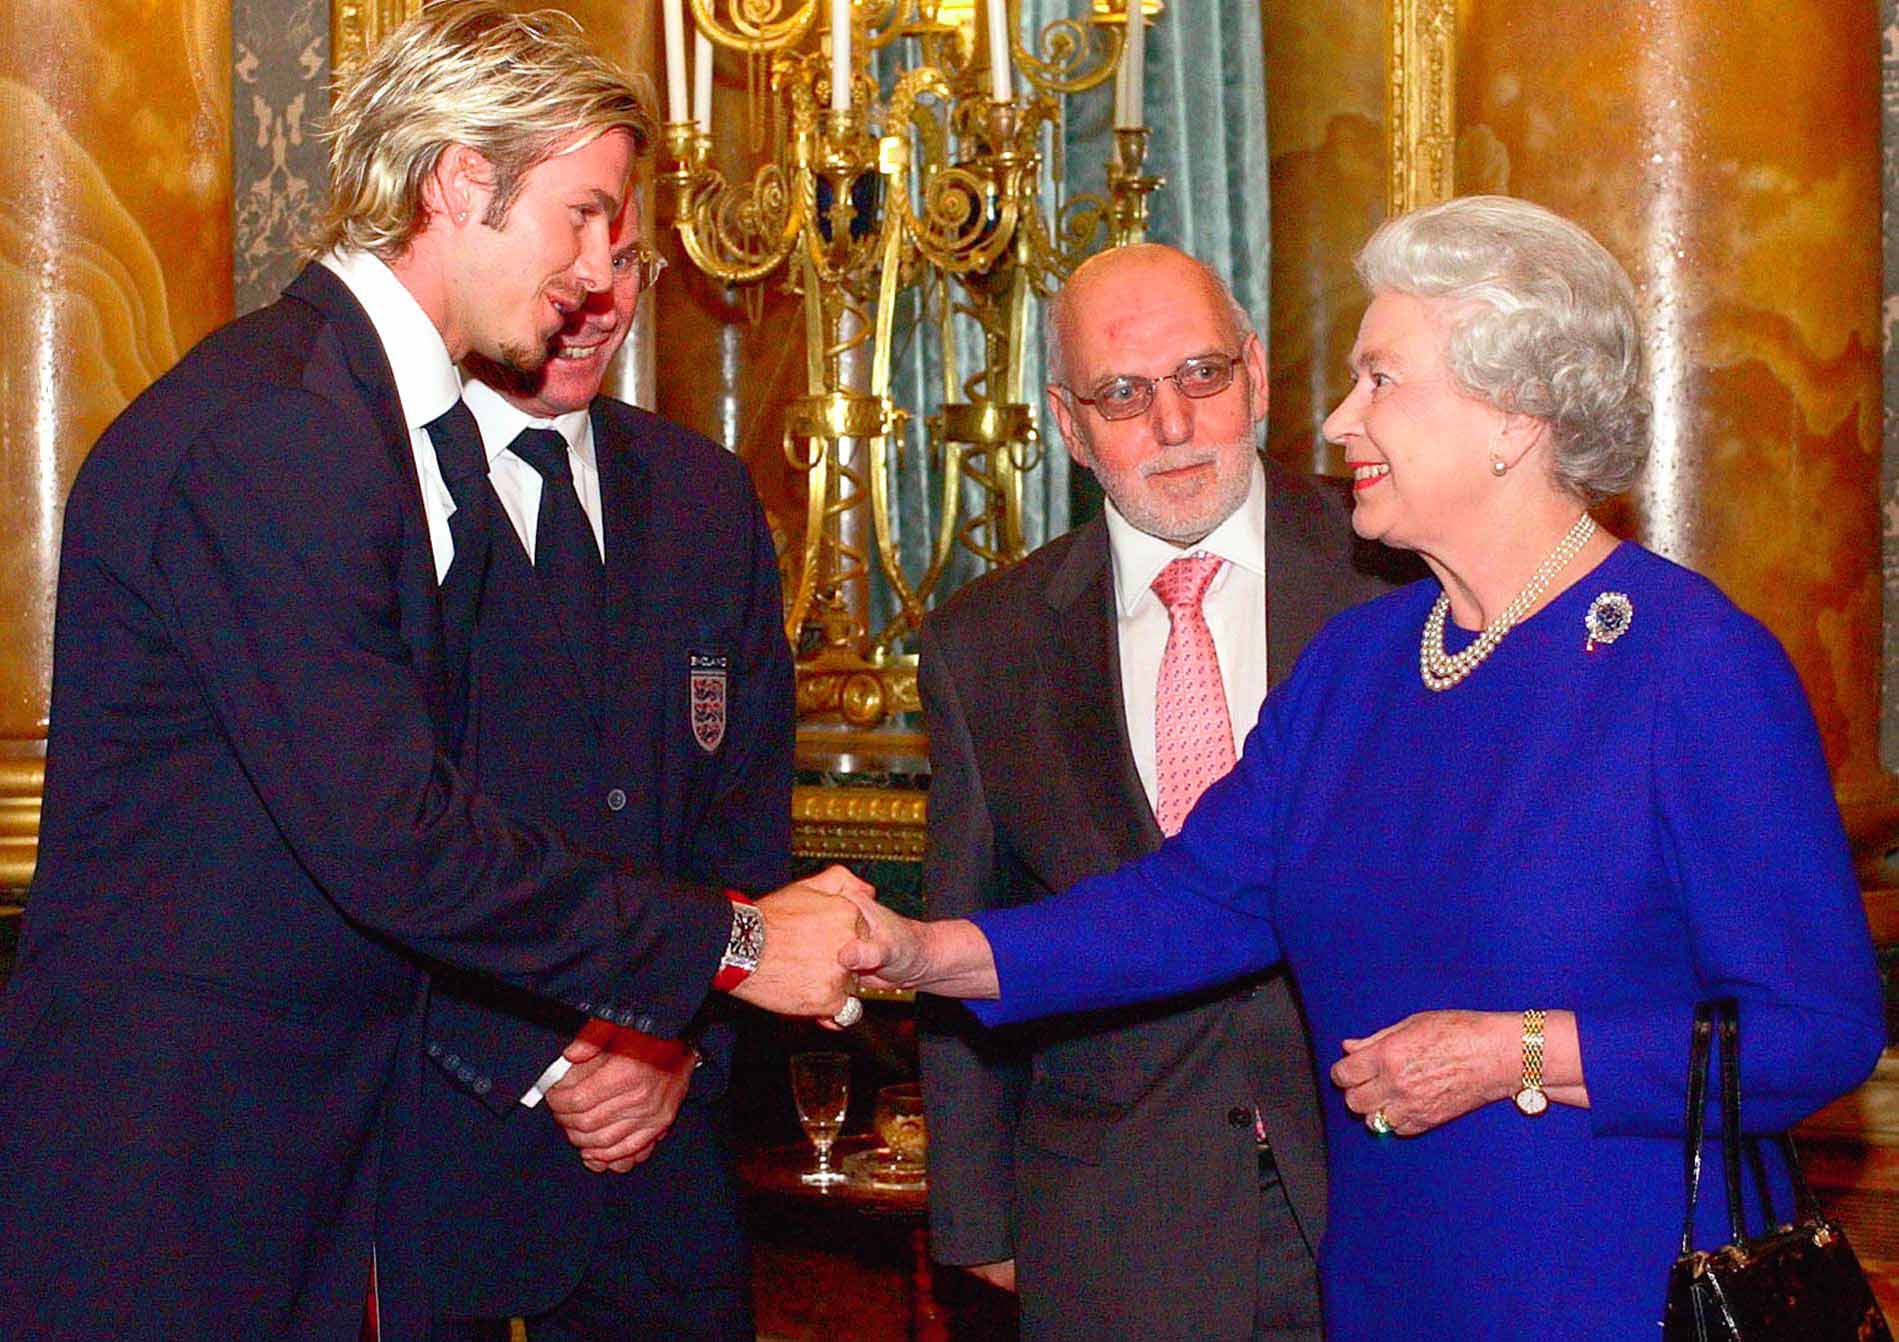 Britain's Queen Elizabeth II meets England soccer captain David Beckham, watched by English Football Association Chairman Geoffrey Thompson, and England coach Sven Goran-Ericsson, partly hidden, during a reception for the Football Association held at Buckingham Palace in London, Tuesday Nov. 19, 2002. The 75-strong England party included backroom staff as well as high profile players and management.(AP Photo/Kirsty Wigglesworth/pool)